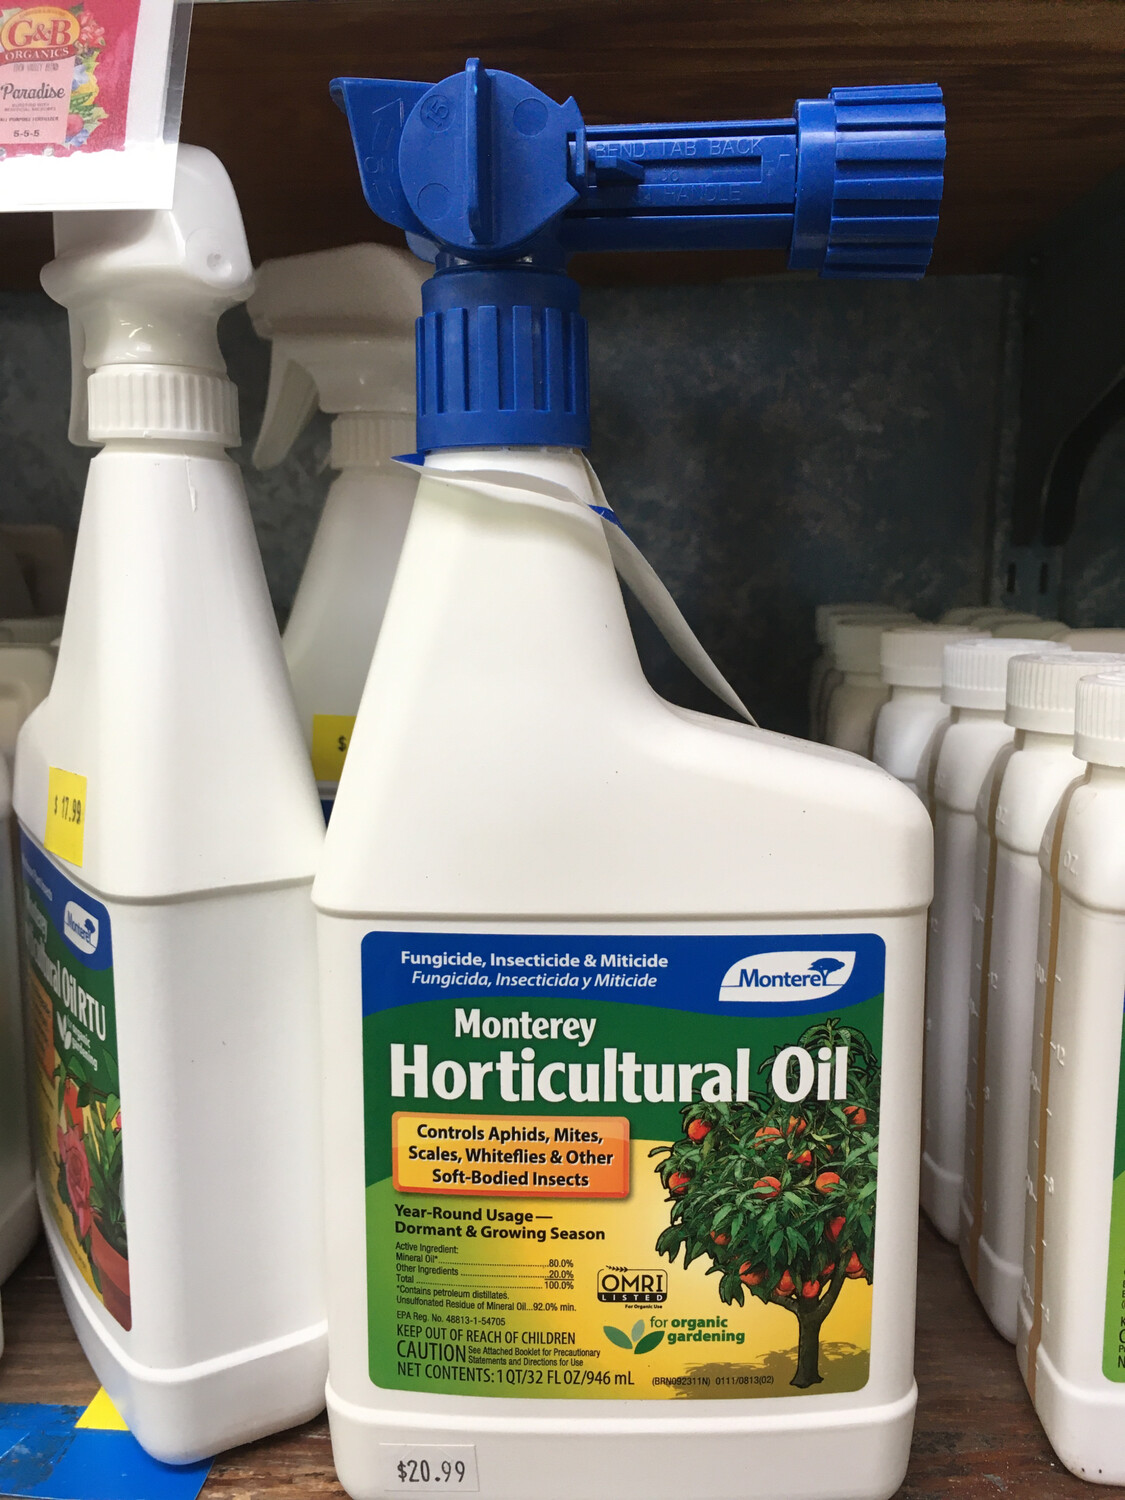 What is in monterey horticultural spray oil